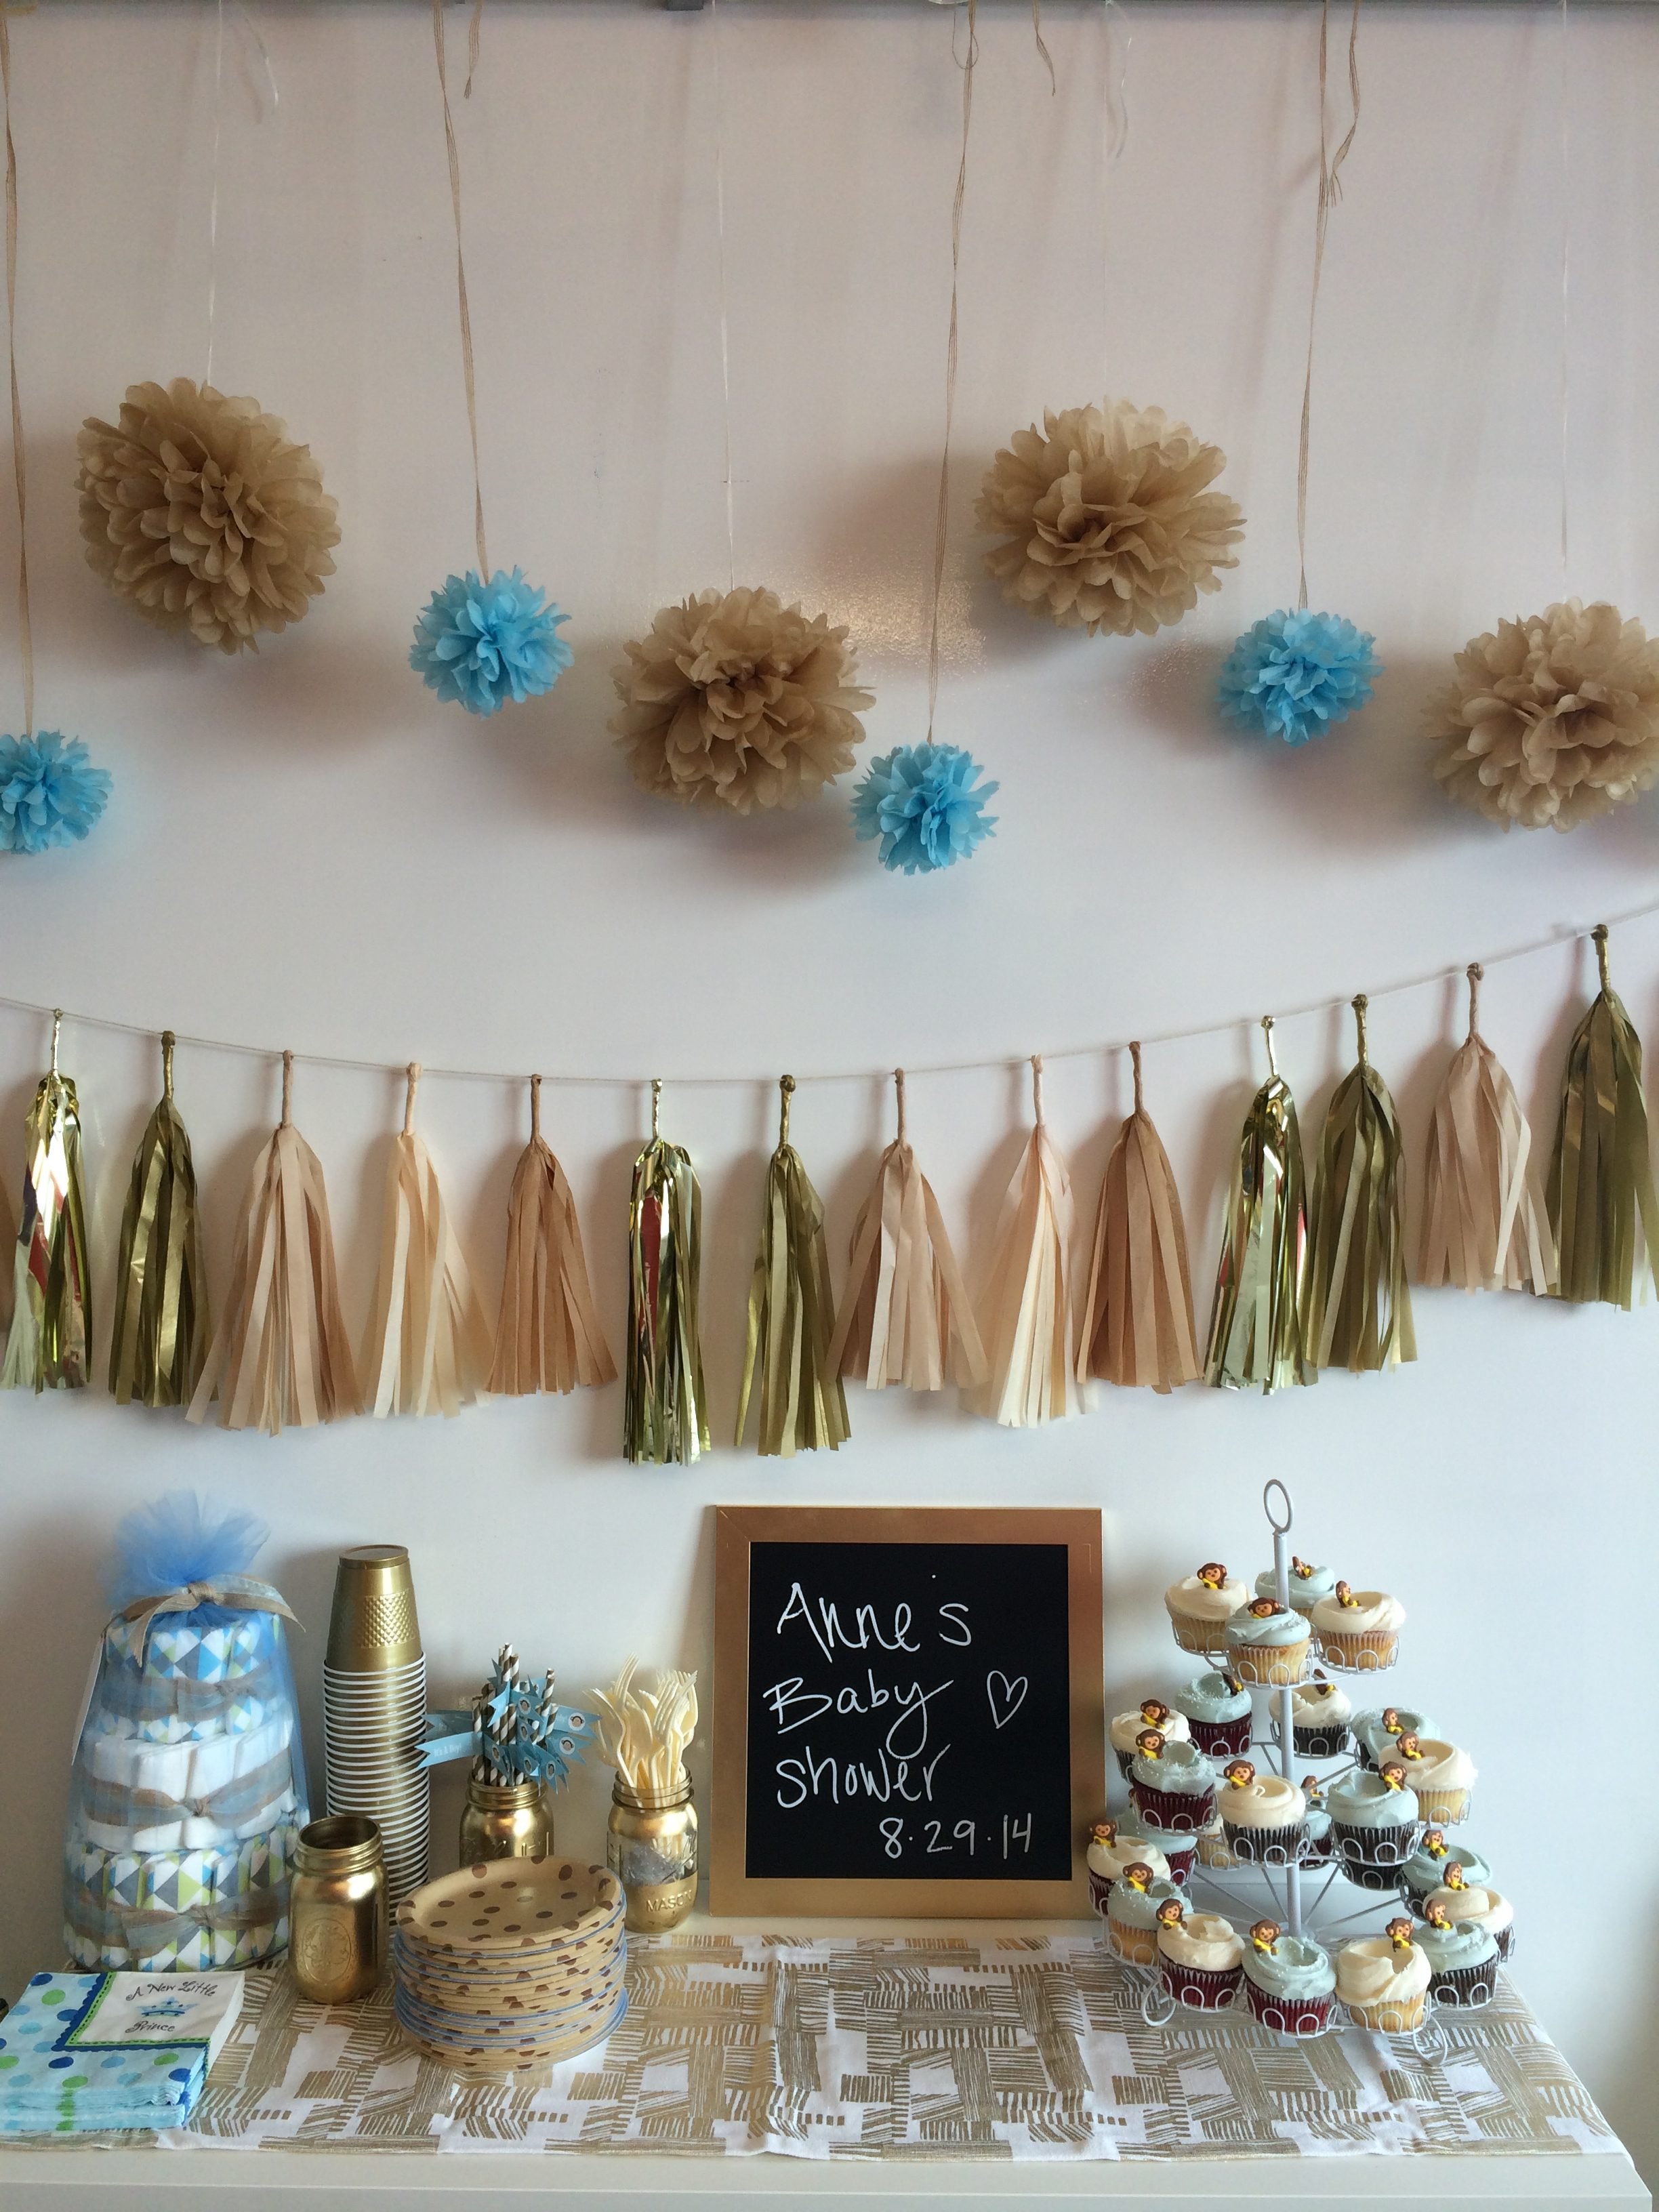 diy boys baby shower decorations e1477178843913 1 World inside pictures